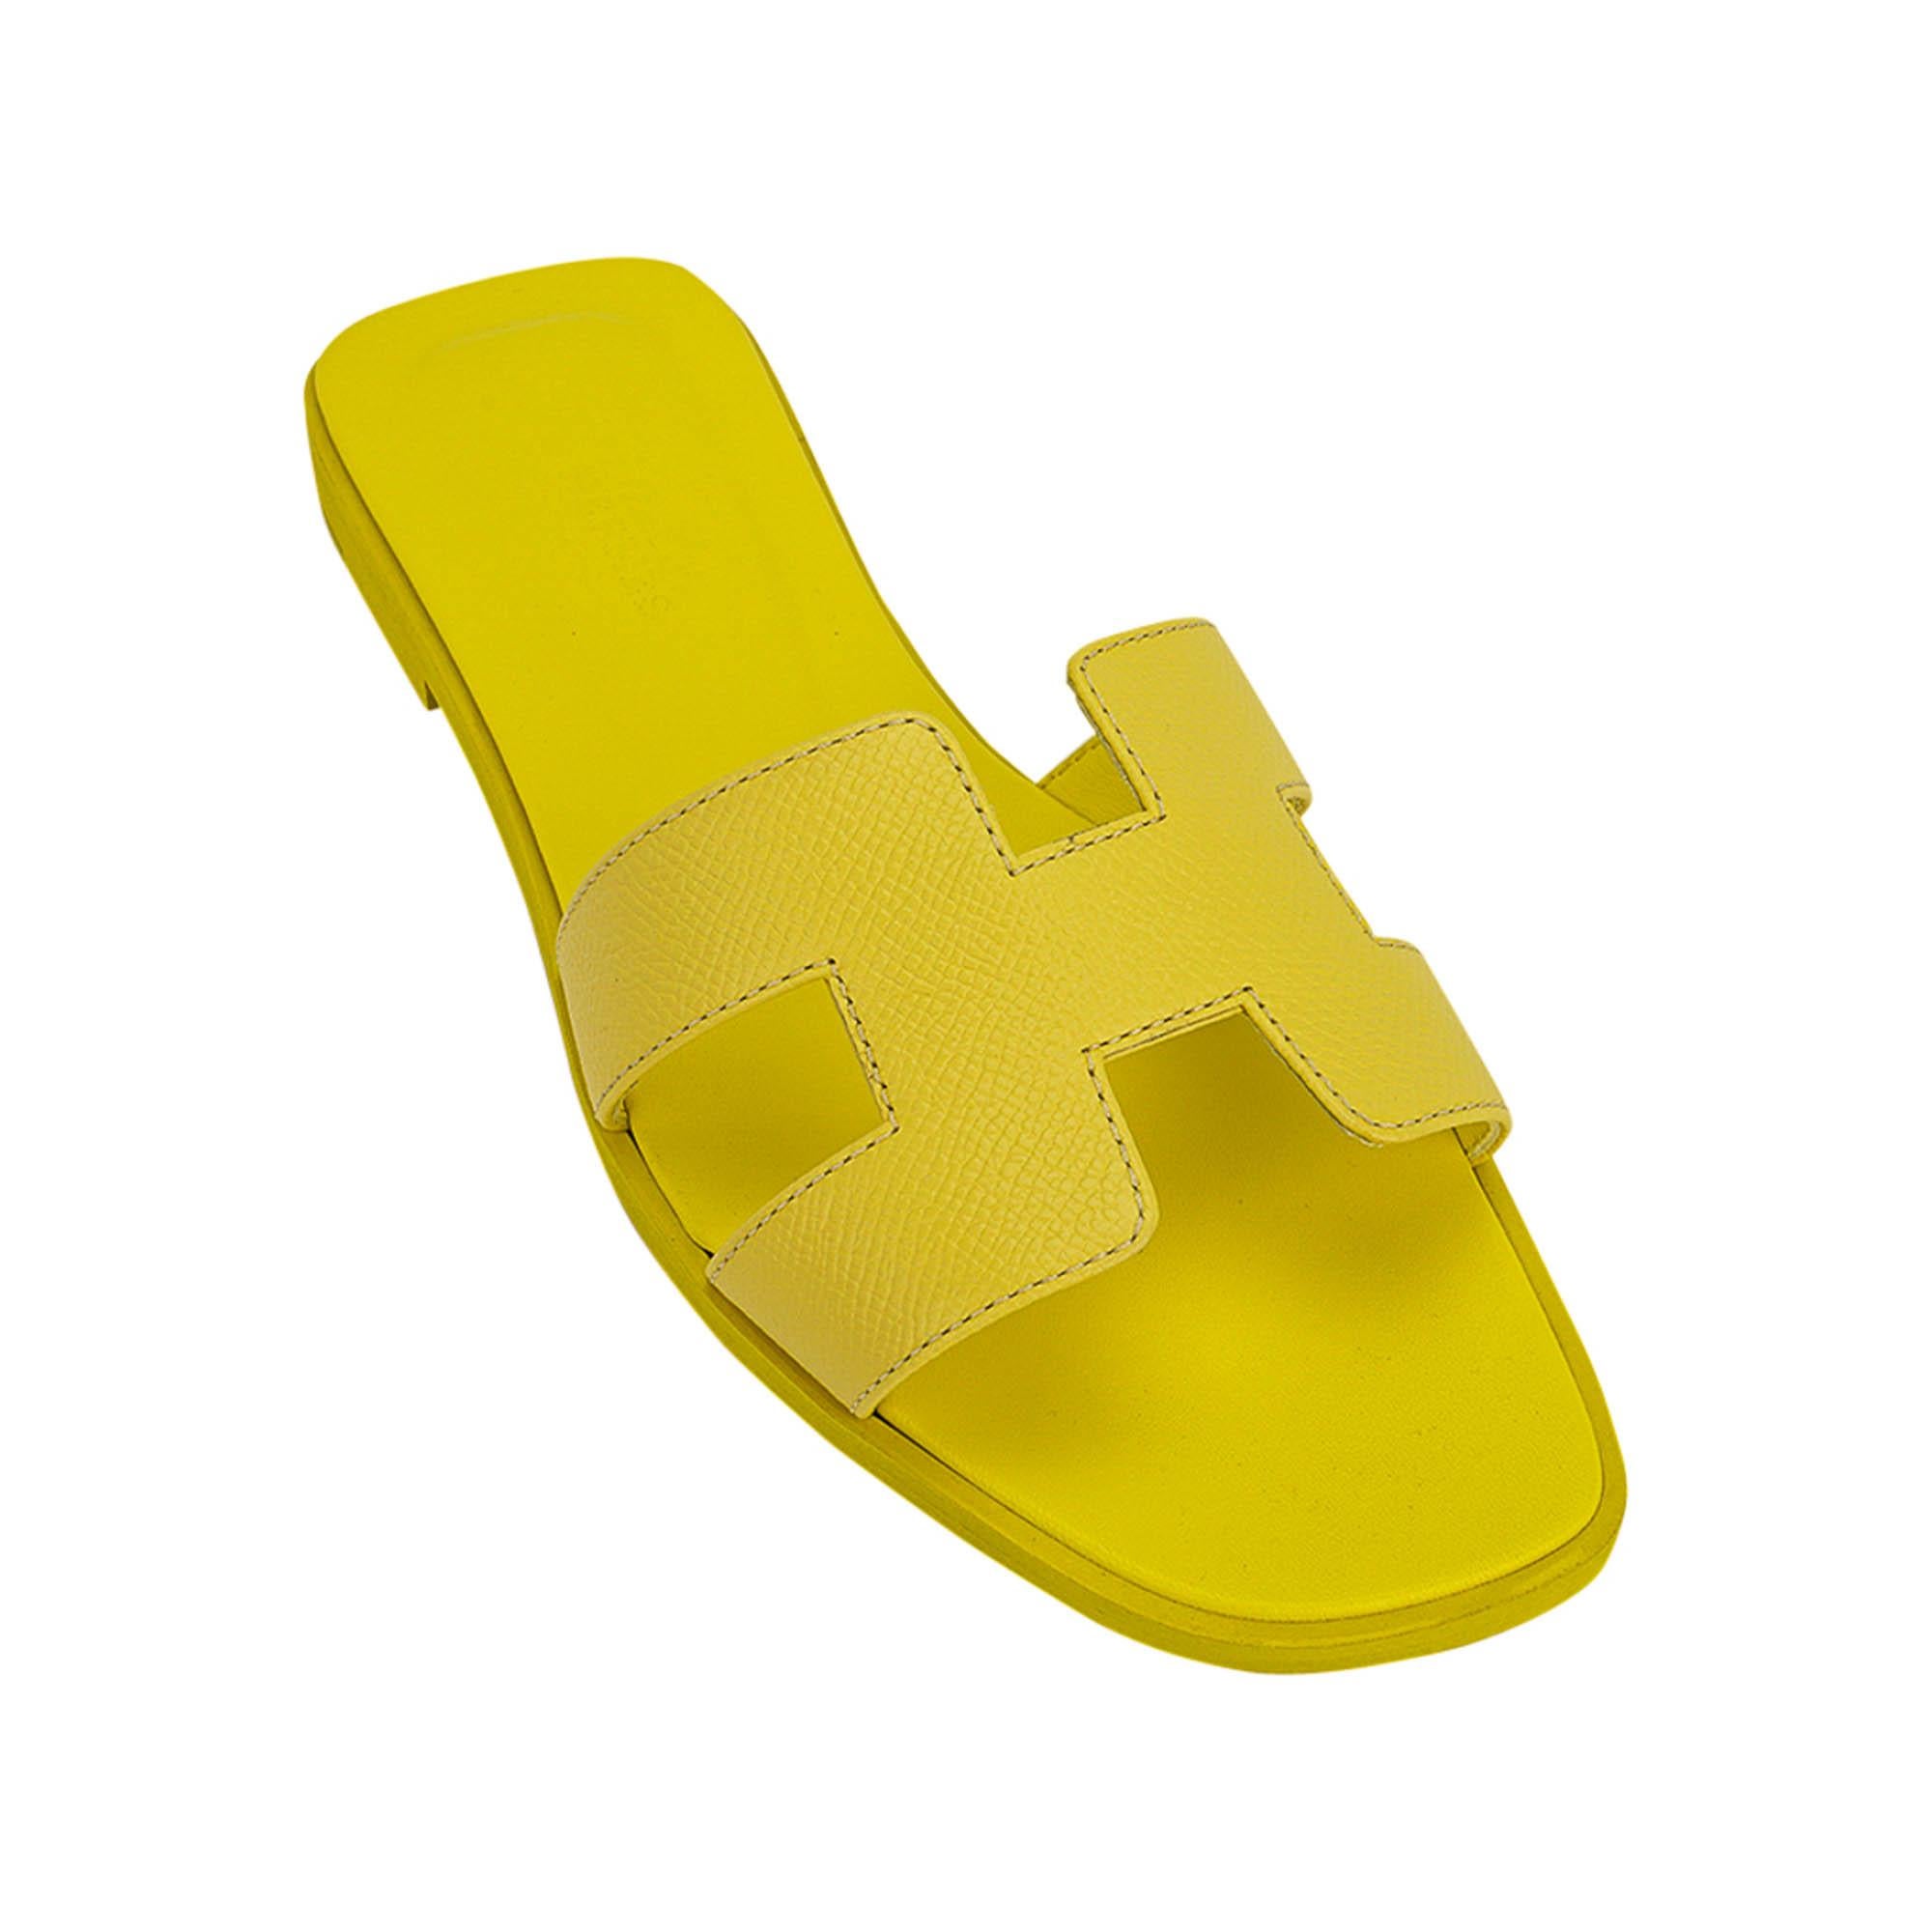 Mightychic offers a pair of Hermes Oran sandal featured in Jaune Pollen.
This pretty yellow Hermes Oran flat slide sandal is featured in Epsom leather.
The iconic H cutout over the top of the foot.
Matching embossed calfskin insole.
Wood heel with